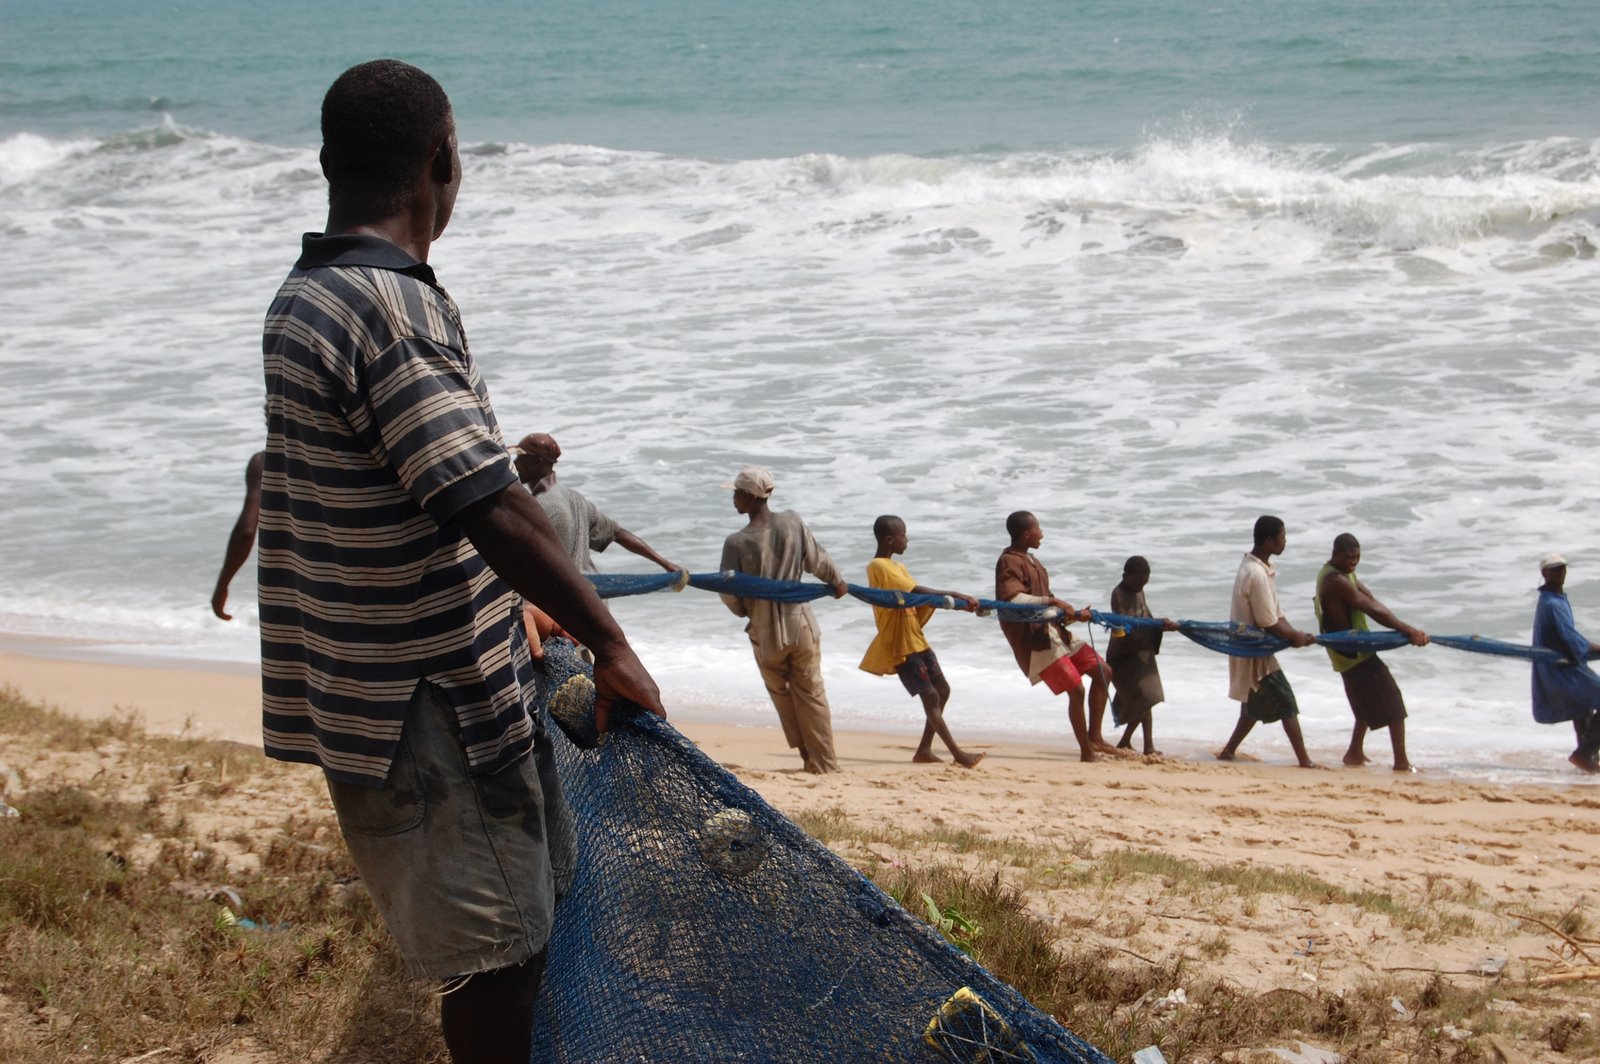 [Fisherman+Eugene+and+his+colleagues+pull+on+the+fishing+nets+in+anticipation+of+a+good+catch+in+Cape+Coast.+Pix+by+Ololade+Adewuyi.jpg]